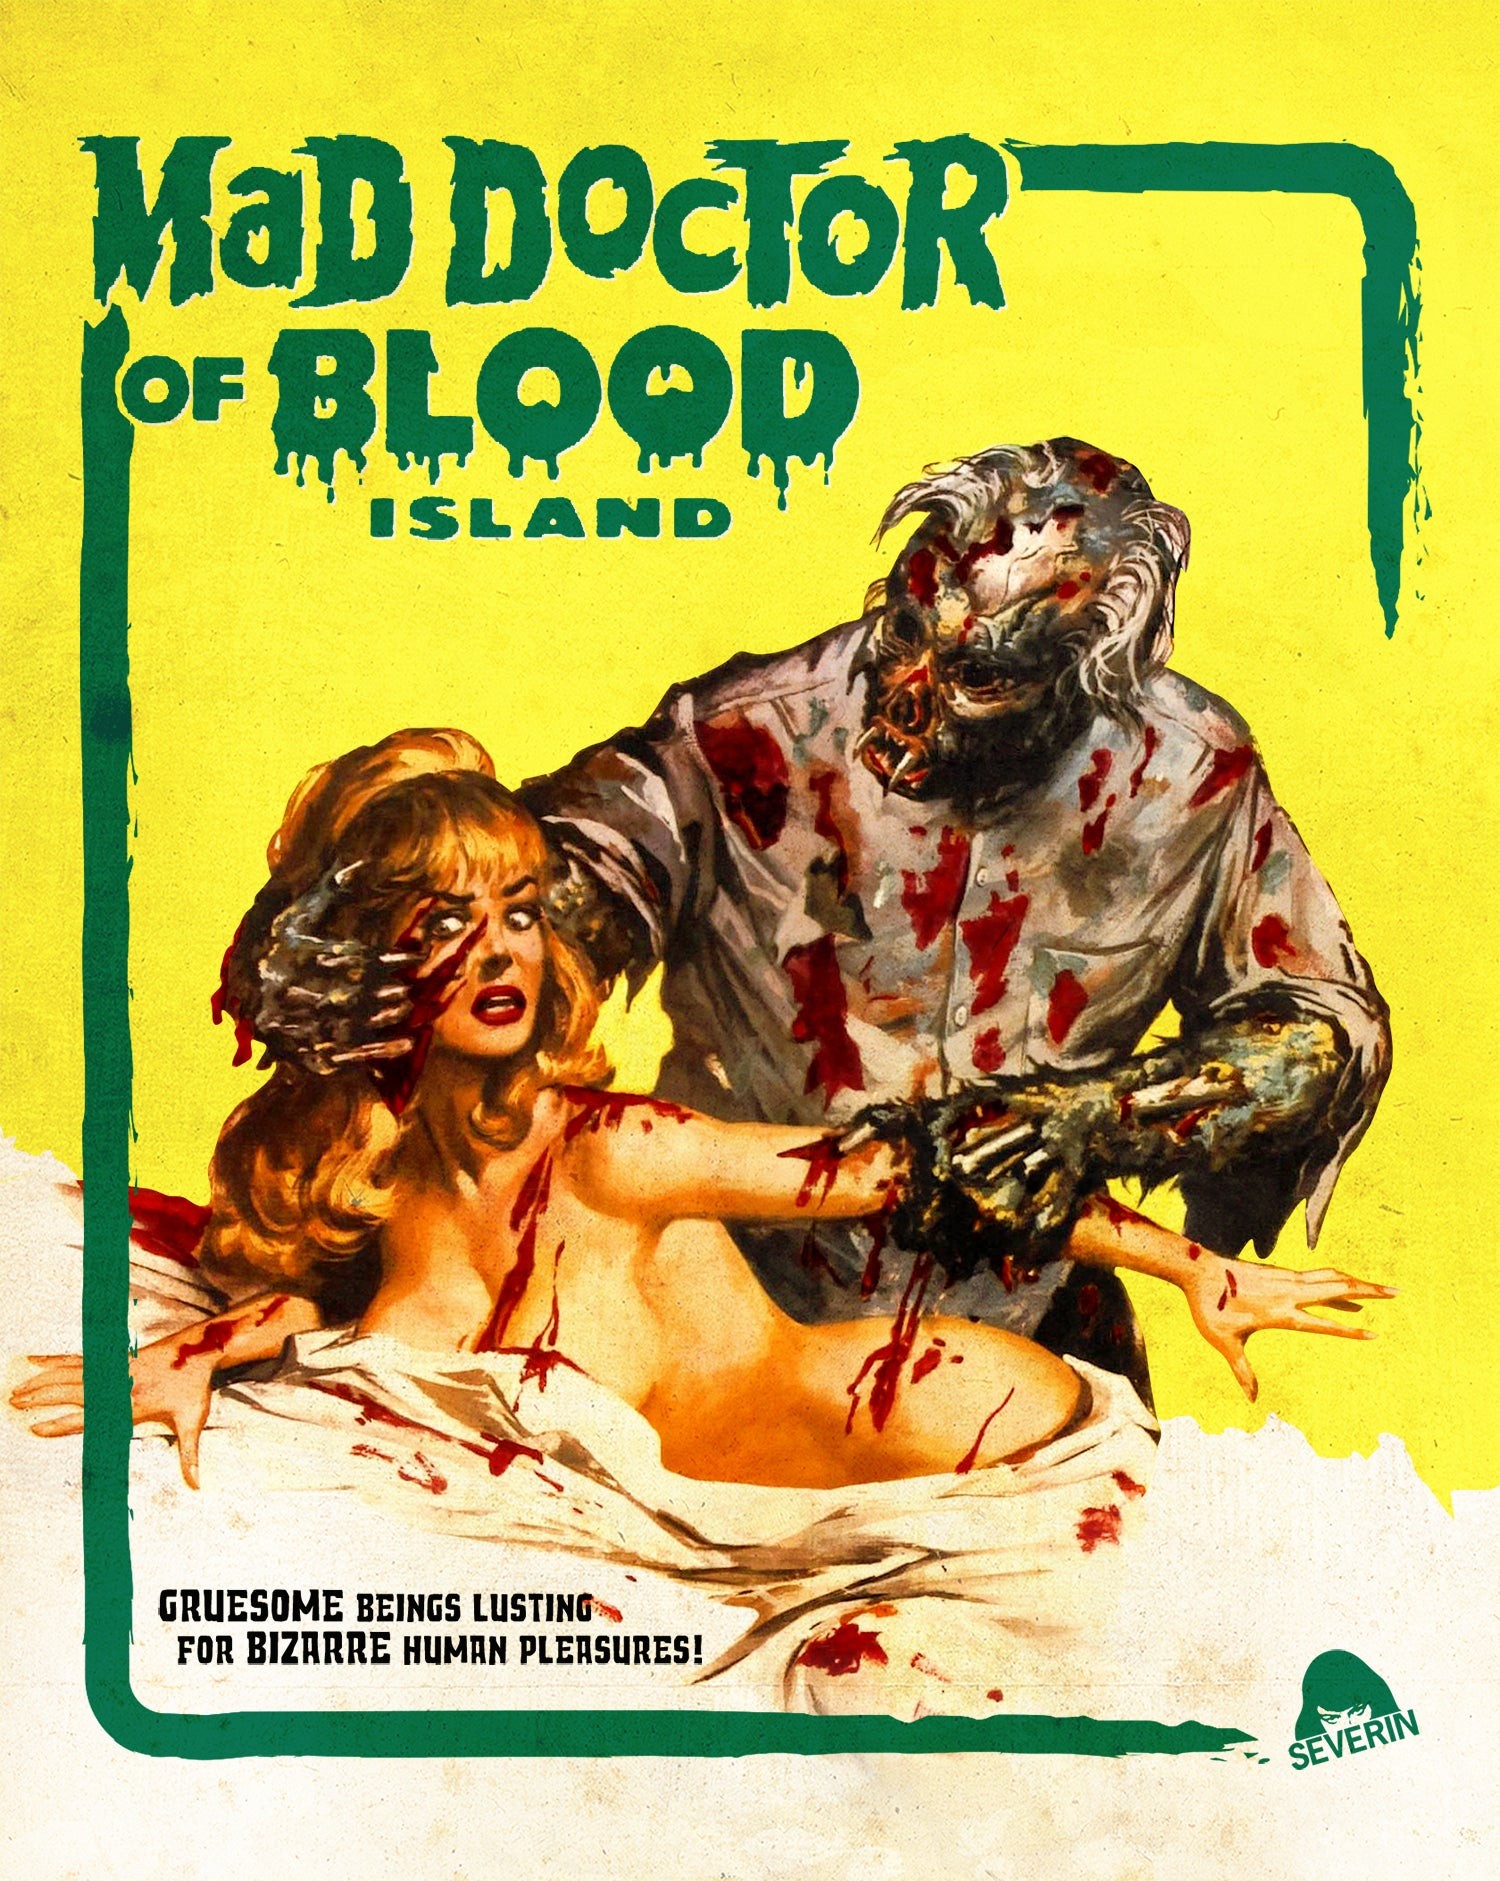 Mad Doctor of Blood Island (1968) 480p HDRip English Adult Movie [250MB]